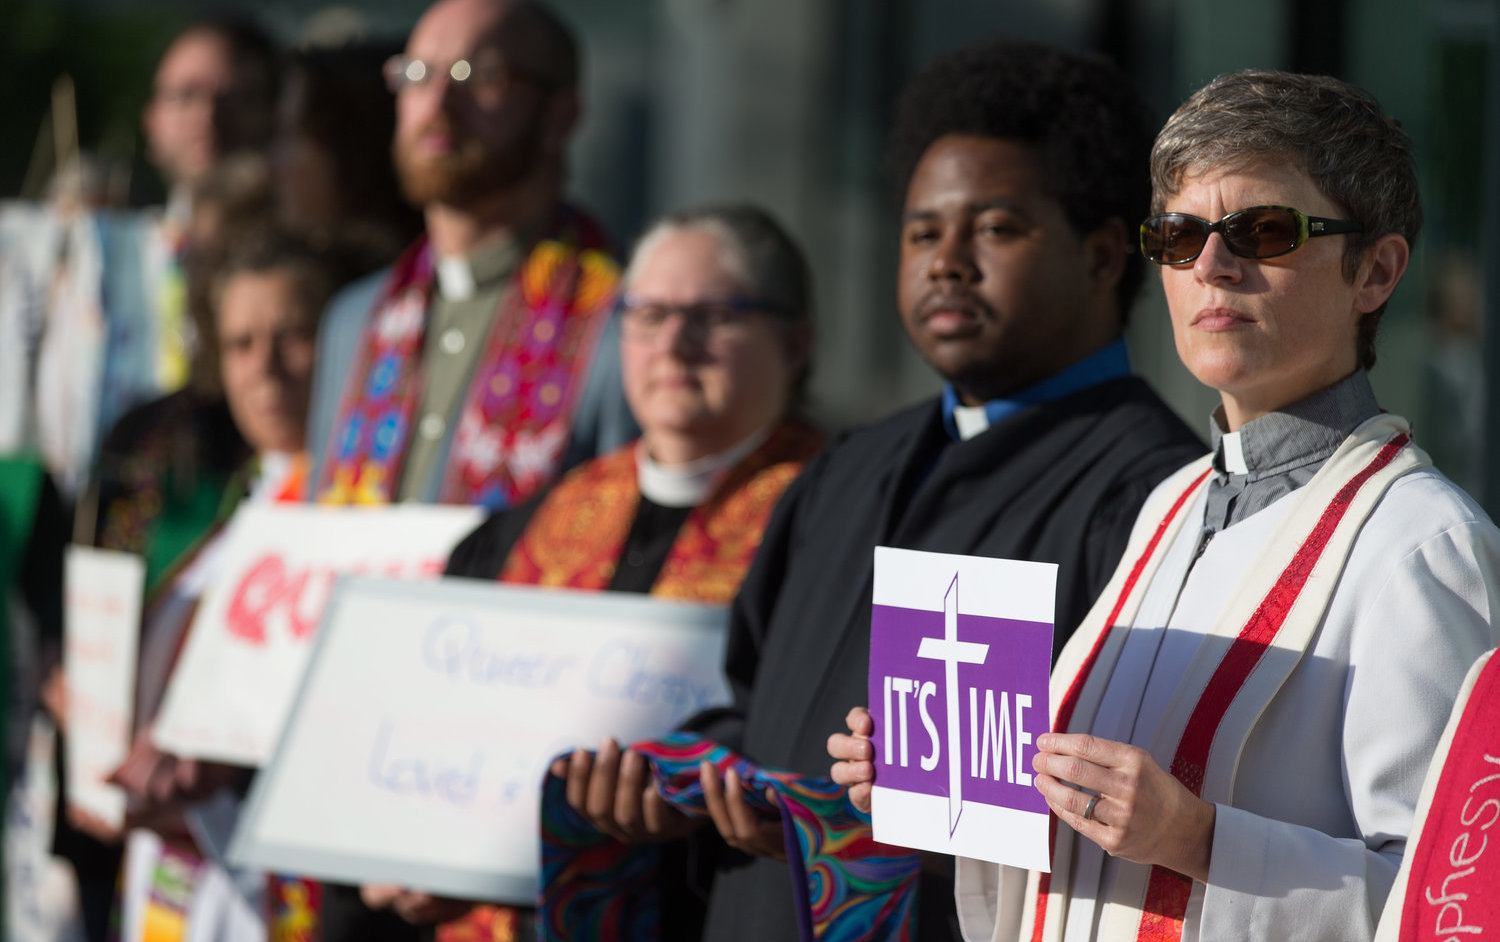 Where Christian Churches, Other Religions Stand On Gay Marriage